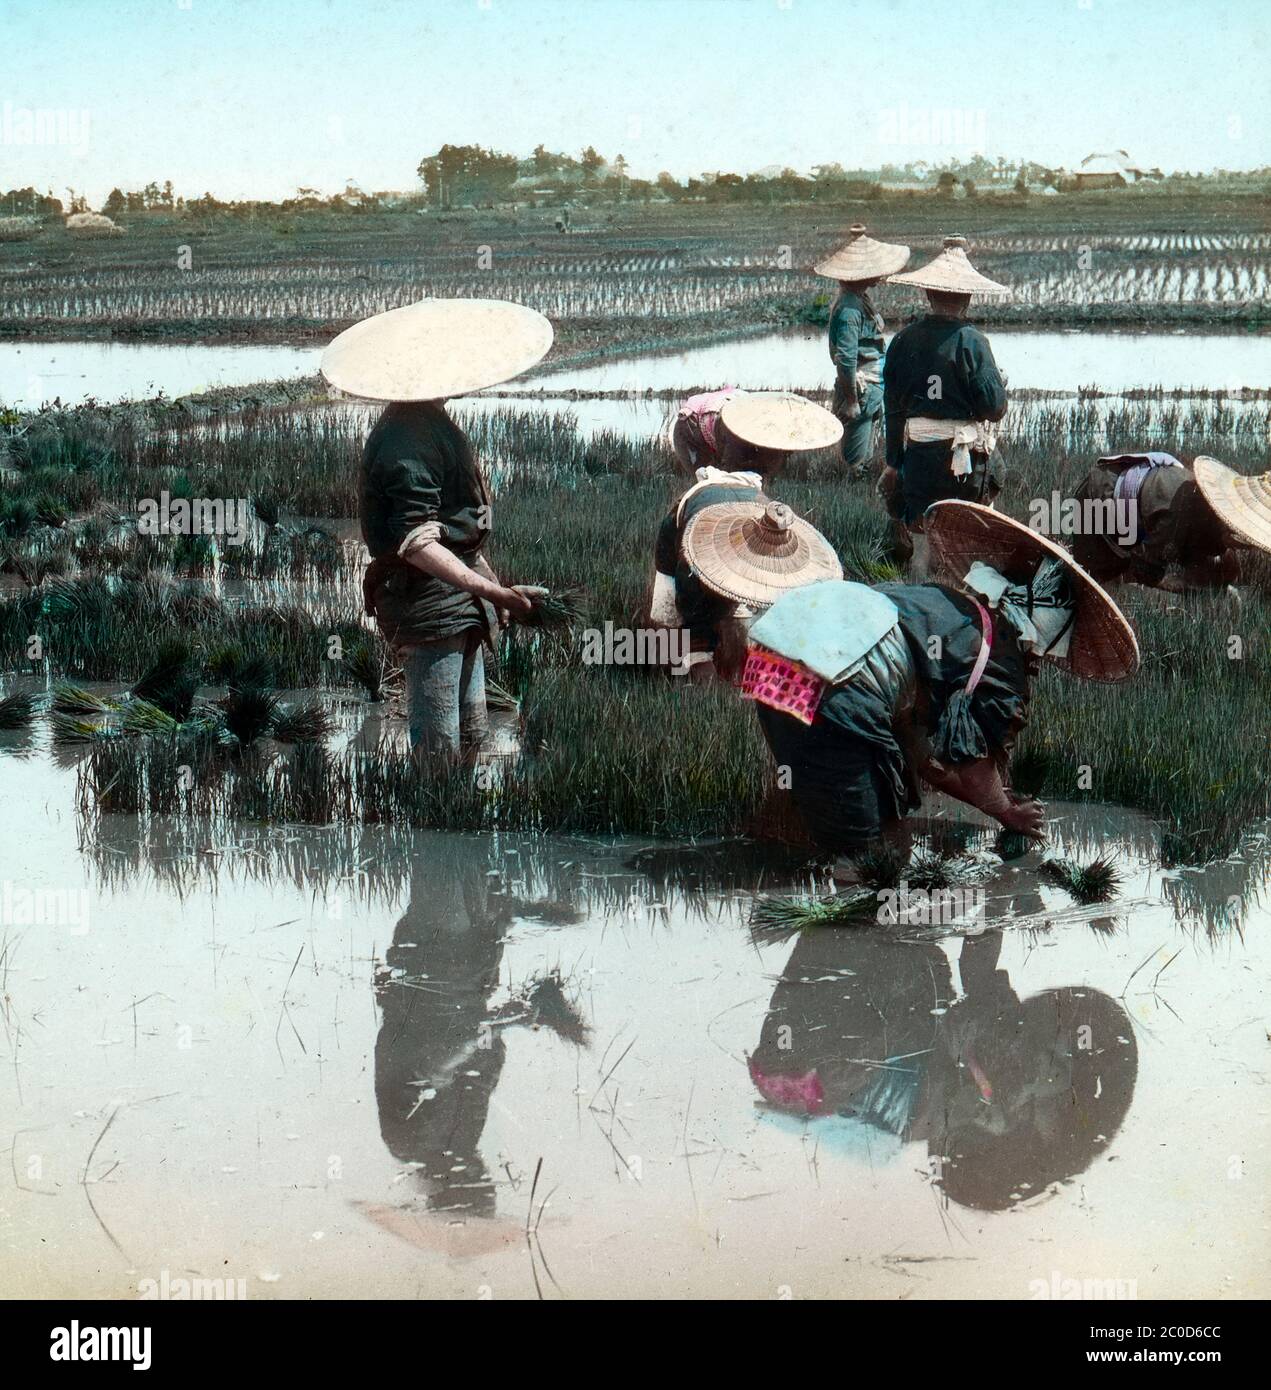 [ 1900s Japan - Japanese Farmers Transplanting Rice Plants ] — Japanese farmers wearing sugegasa (sedge-woven hats) transplanting rice plants.  The endless rice fields are a silent witness to the importance of rice cultivation in Japan.  20th century vintage glass slide. Stock Photo